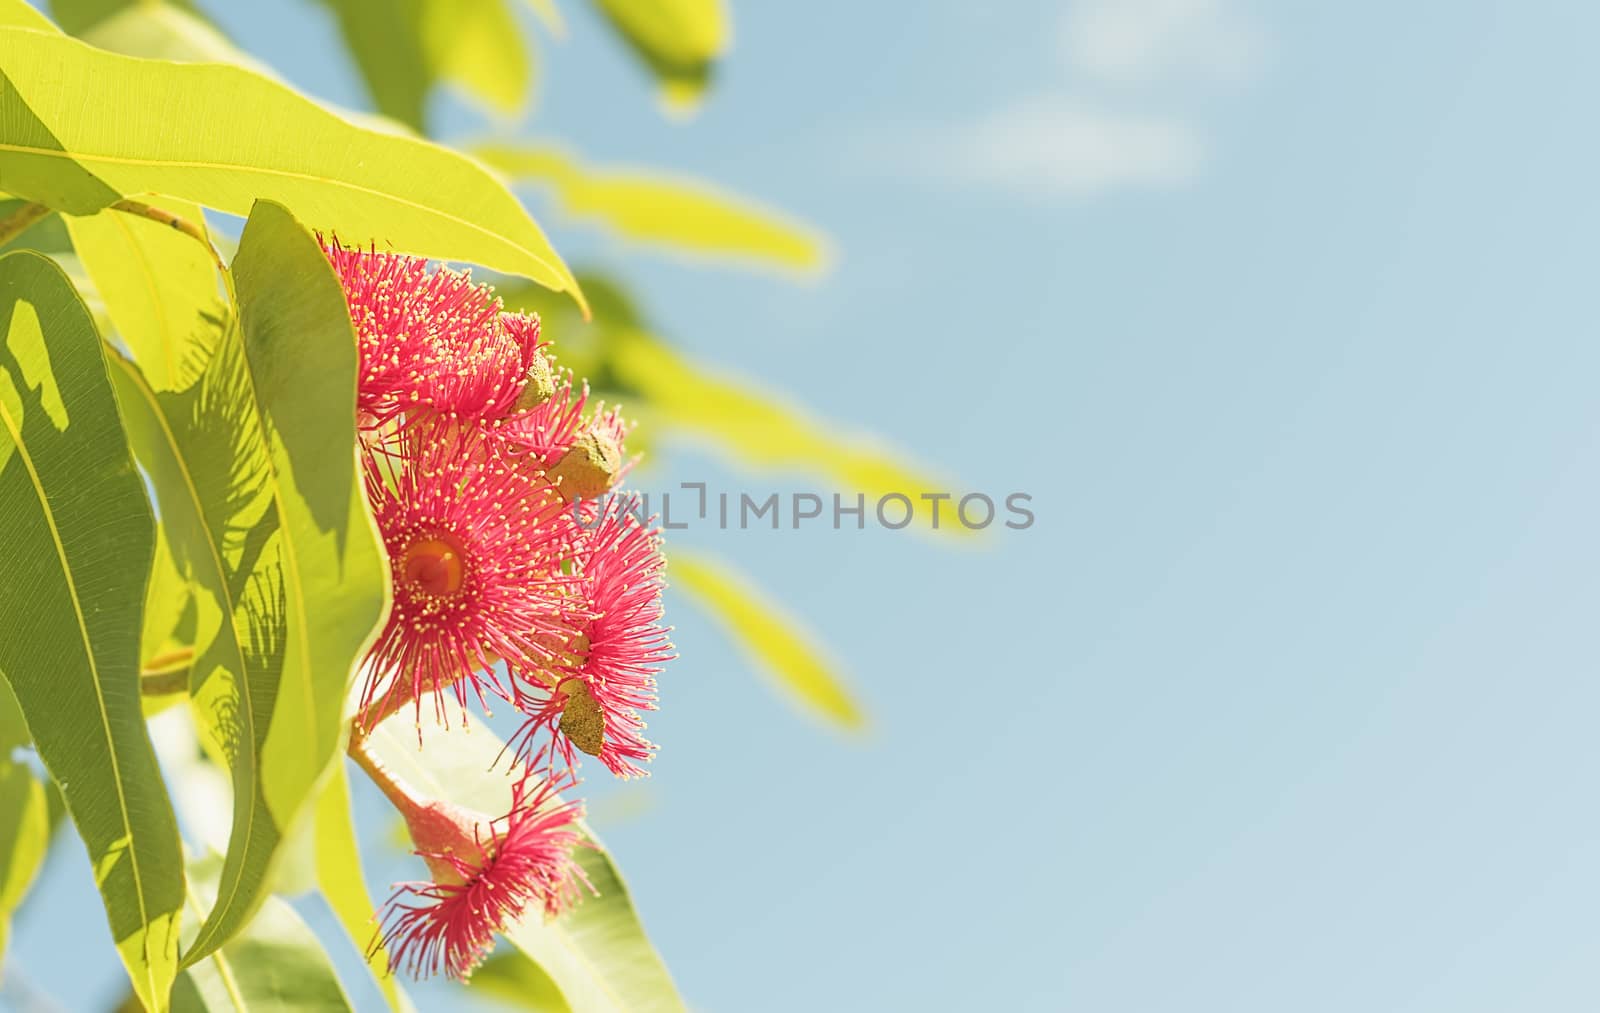 Australian red gum flowers in sunlight with blue sky condolence background